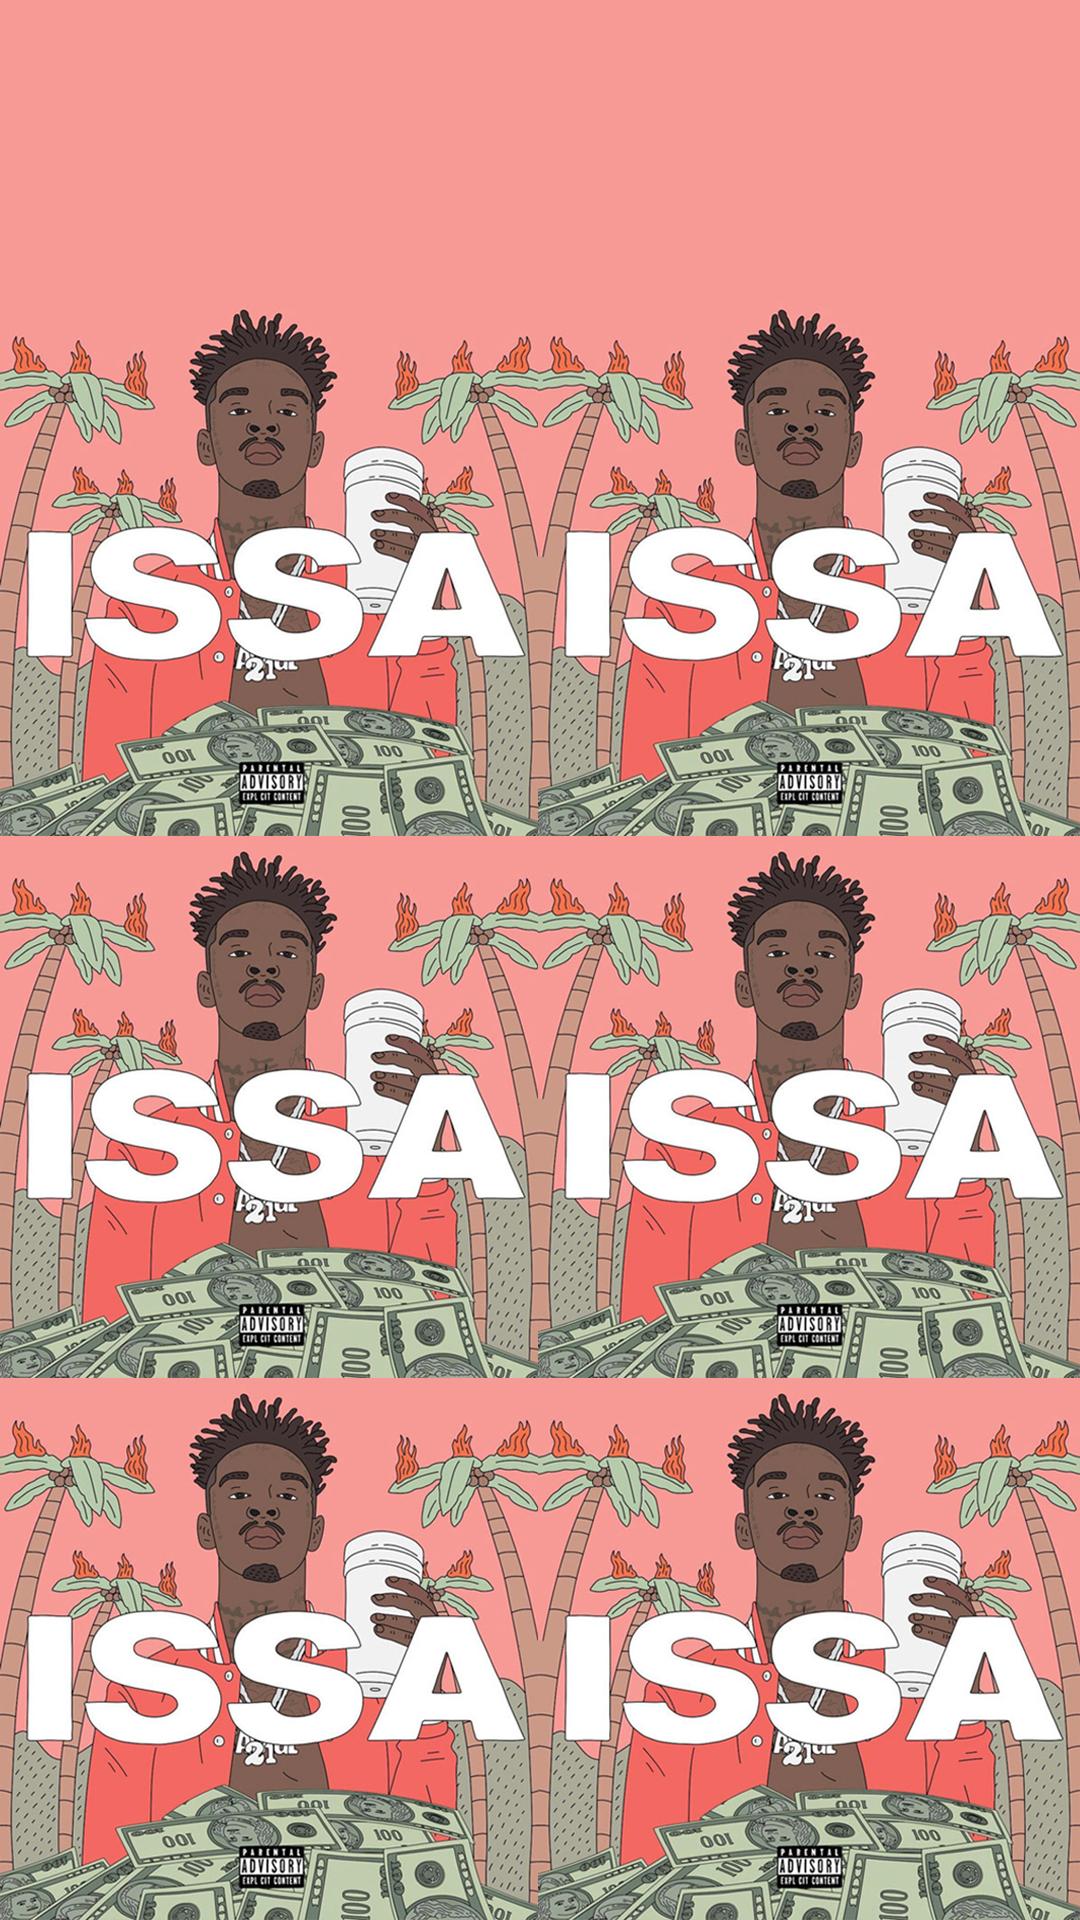 Mobile wallpaper: Music, 21 Savage, 1355581 download the picture